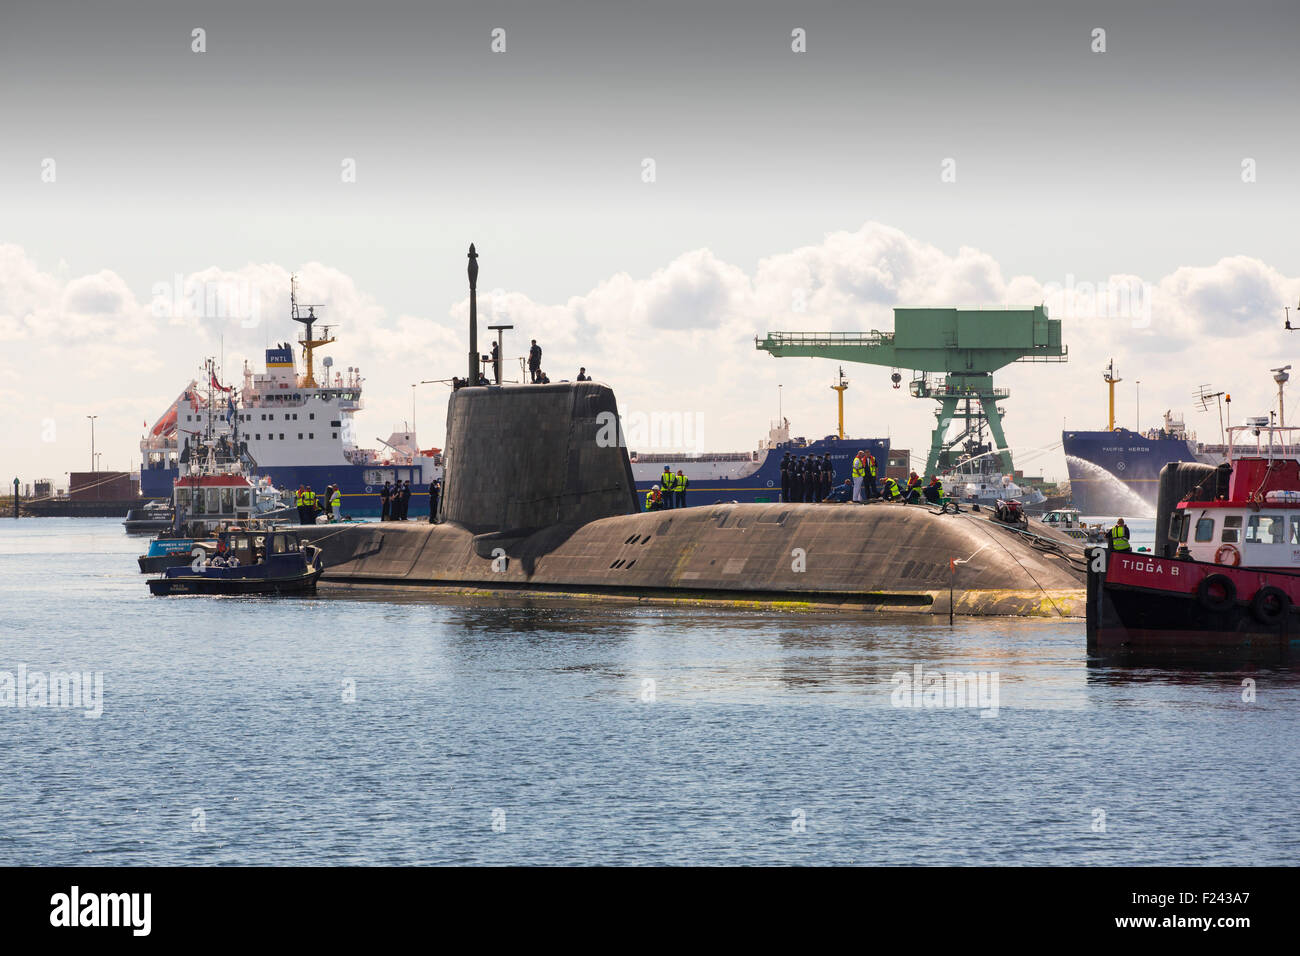 The Artful an Astute class hunter killer nuclear powered submarine is moved from BAE Systems in Barrow in Furness up to the Faslane submarine base in Scotland, UK. The submarines are armed with Spearfish torpedoes and Tomahawk Cruise missiles. This shot shows the Pacific Heron a nuclear transport ship behind. Stock Photo